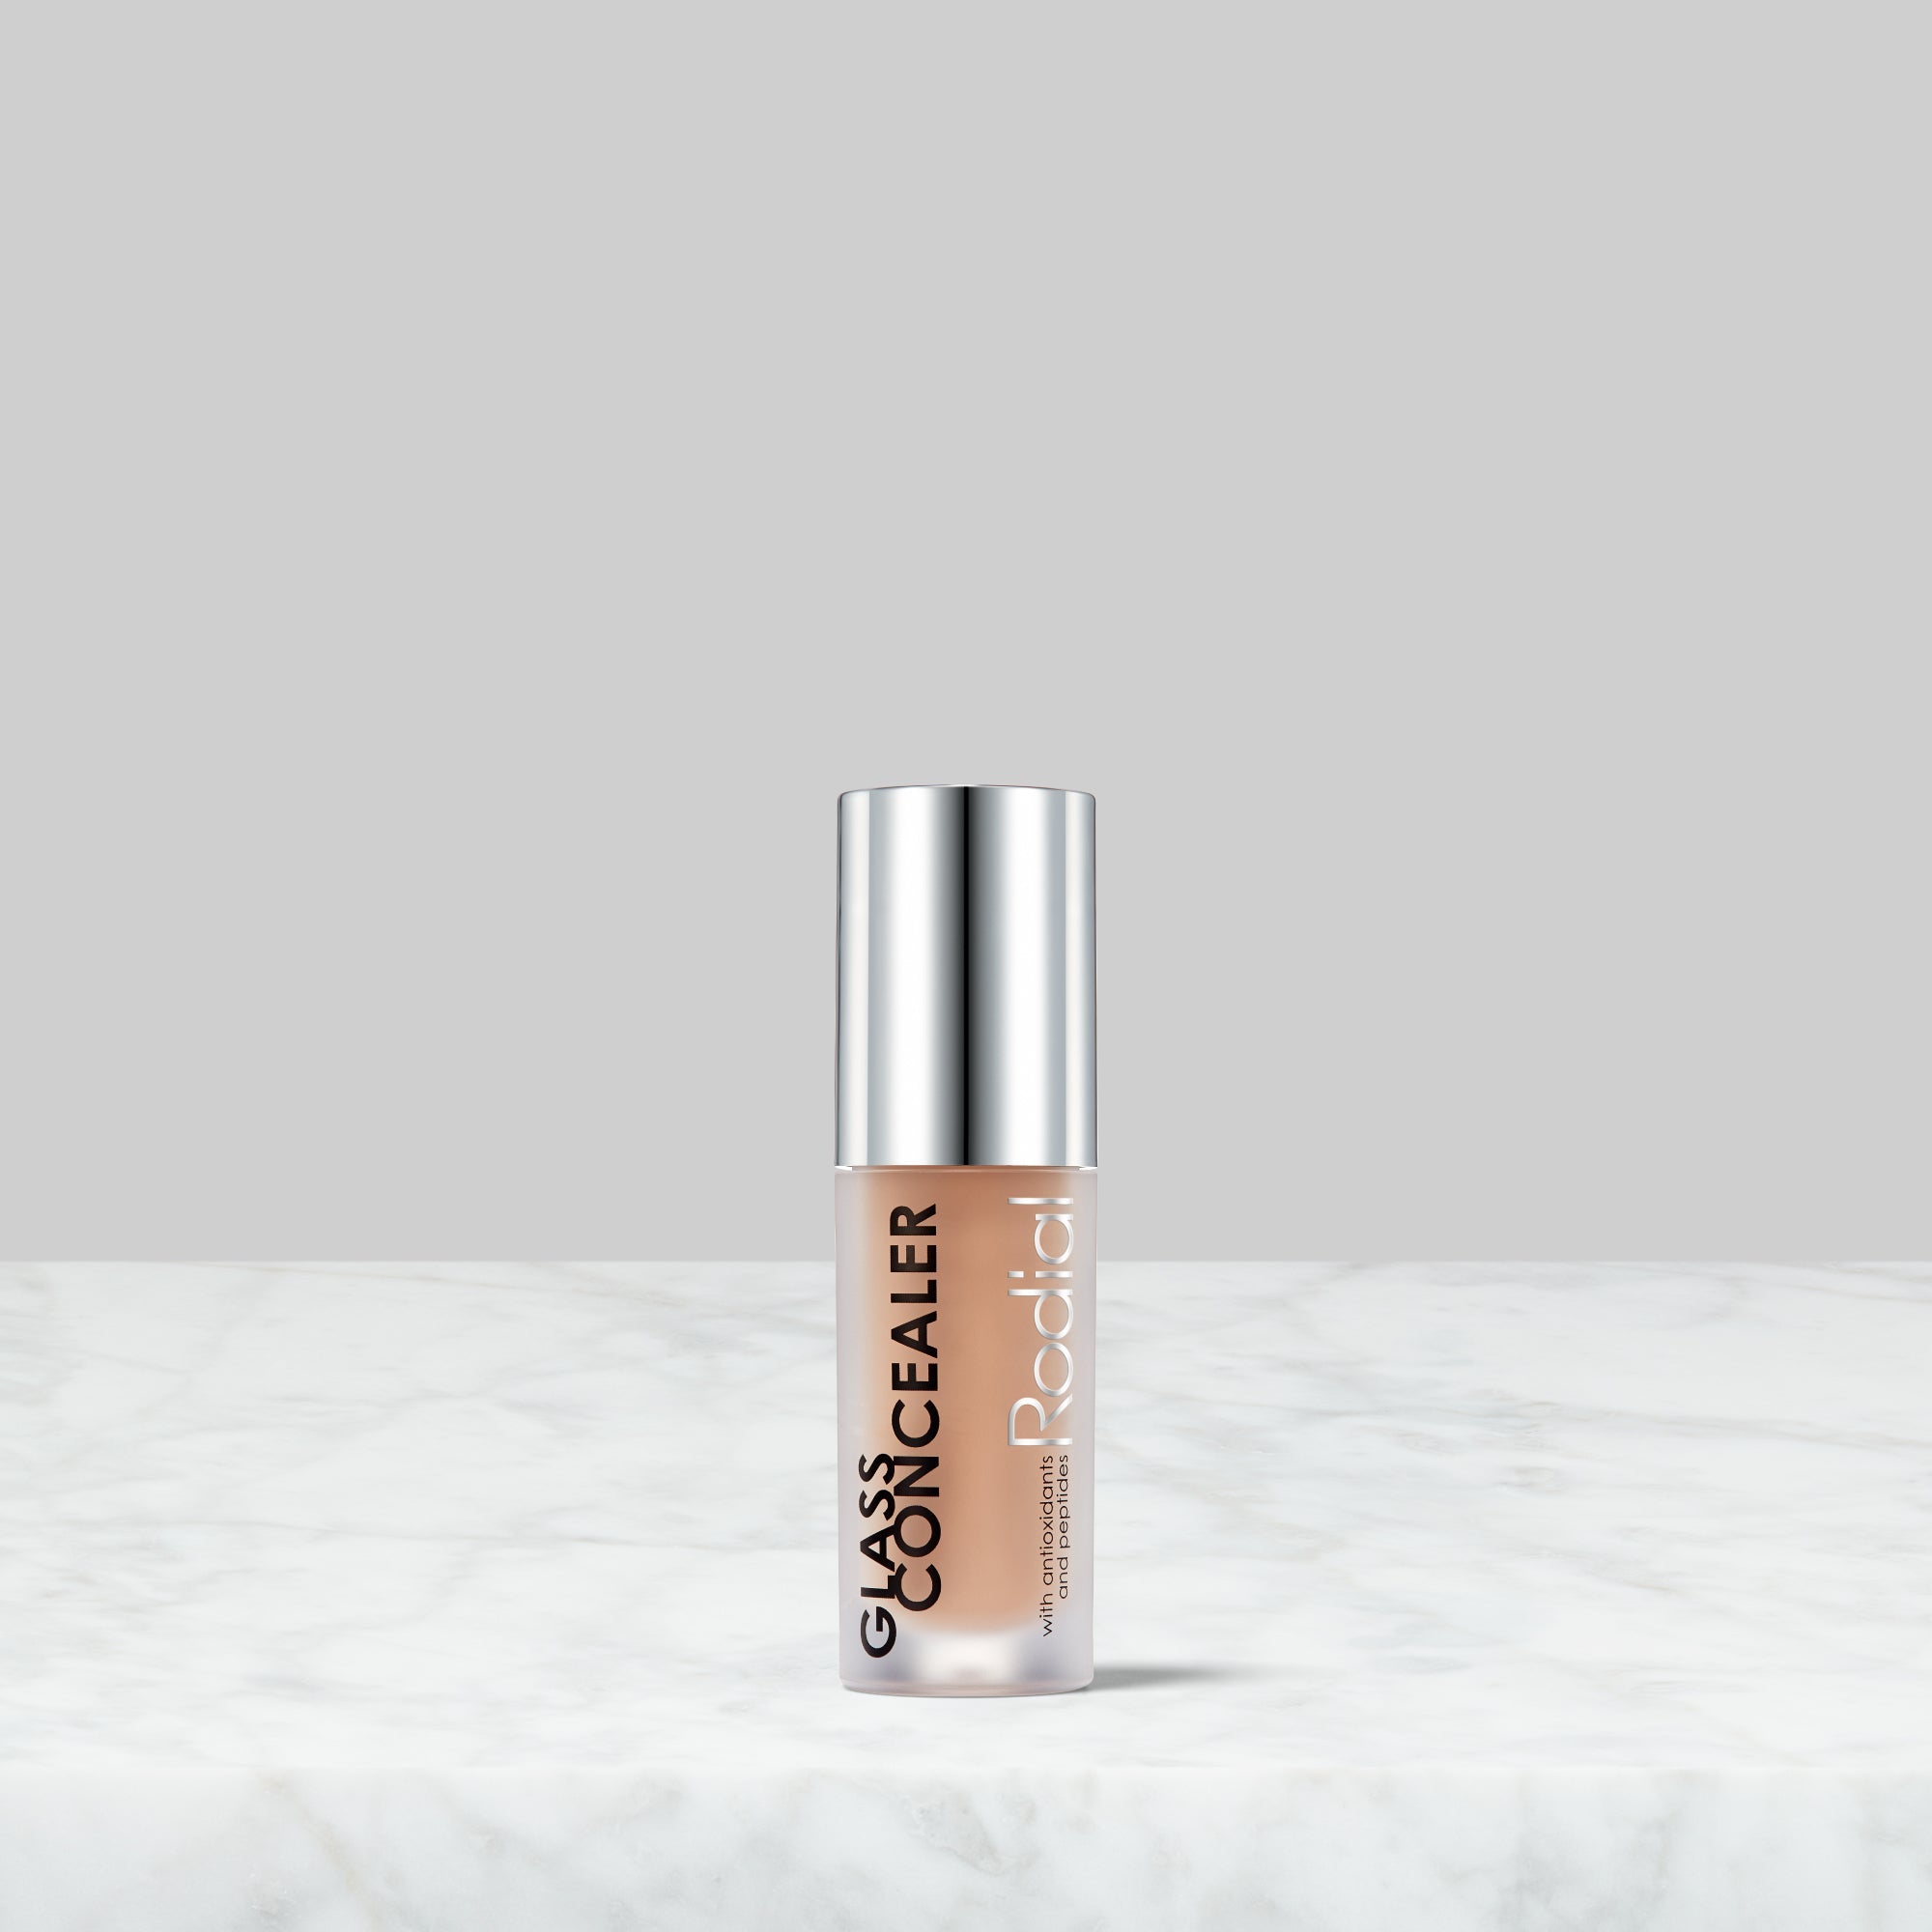 Rodial Glass Concealer / Shade 04